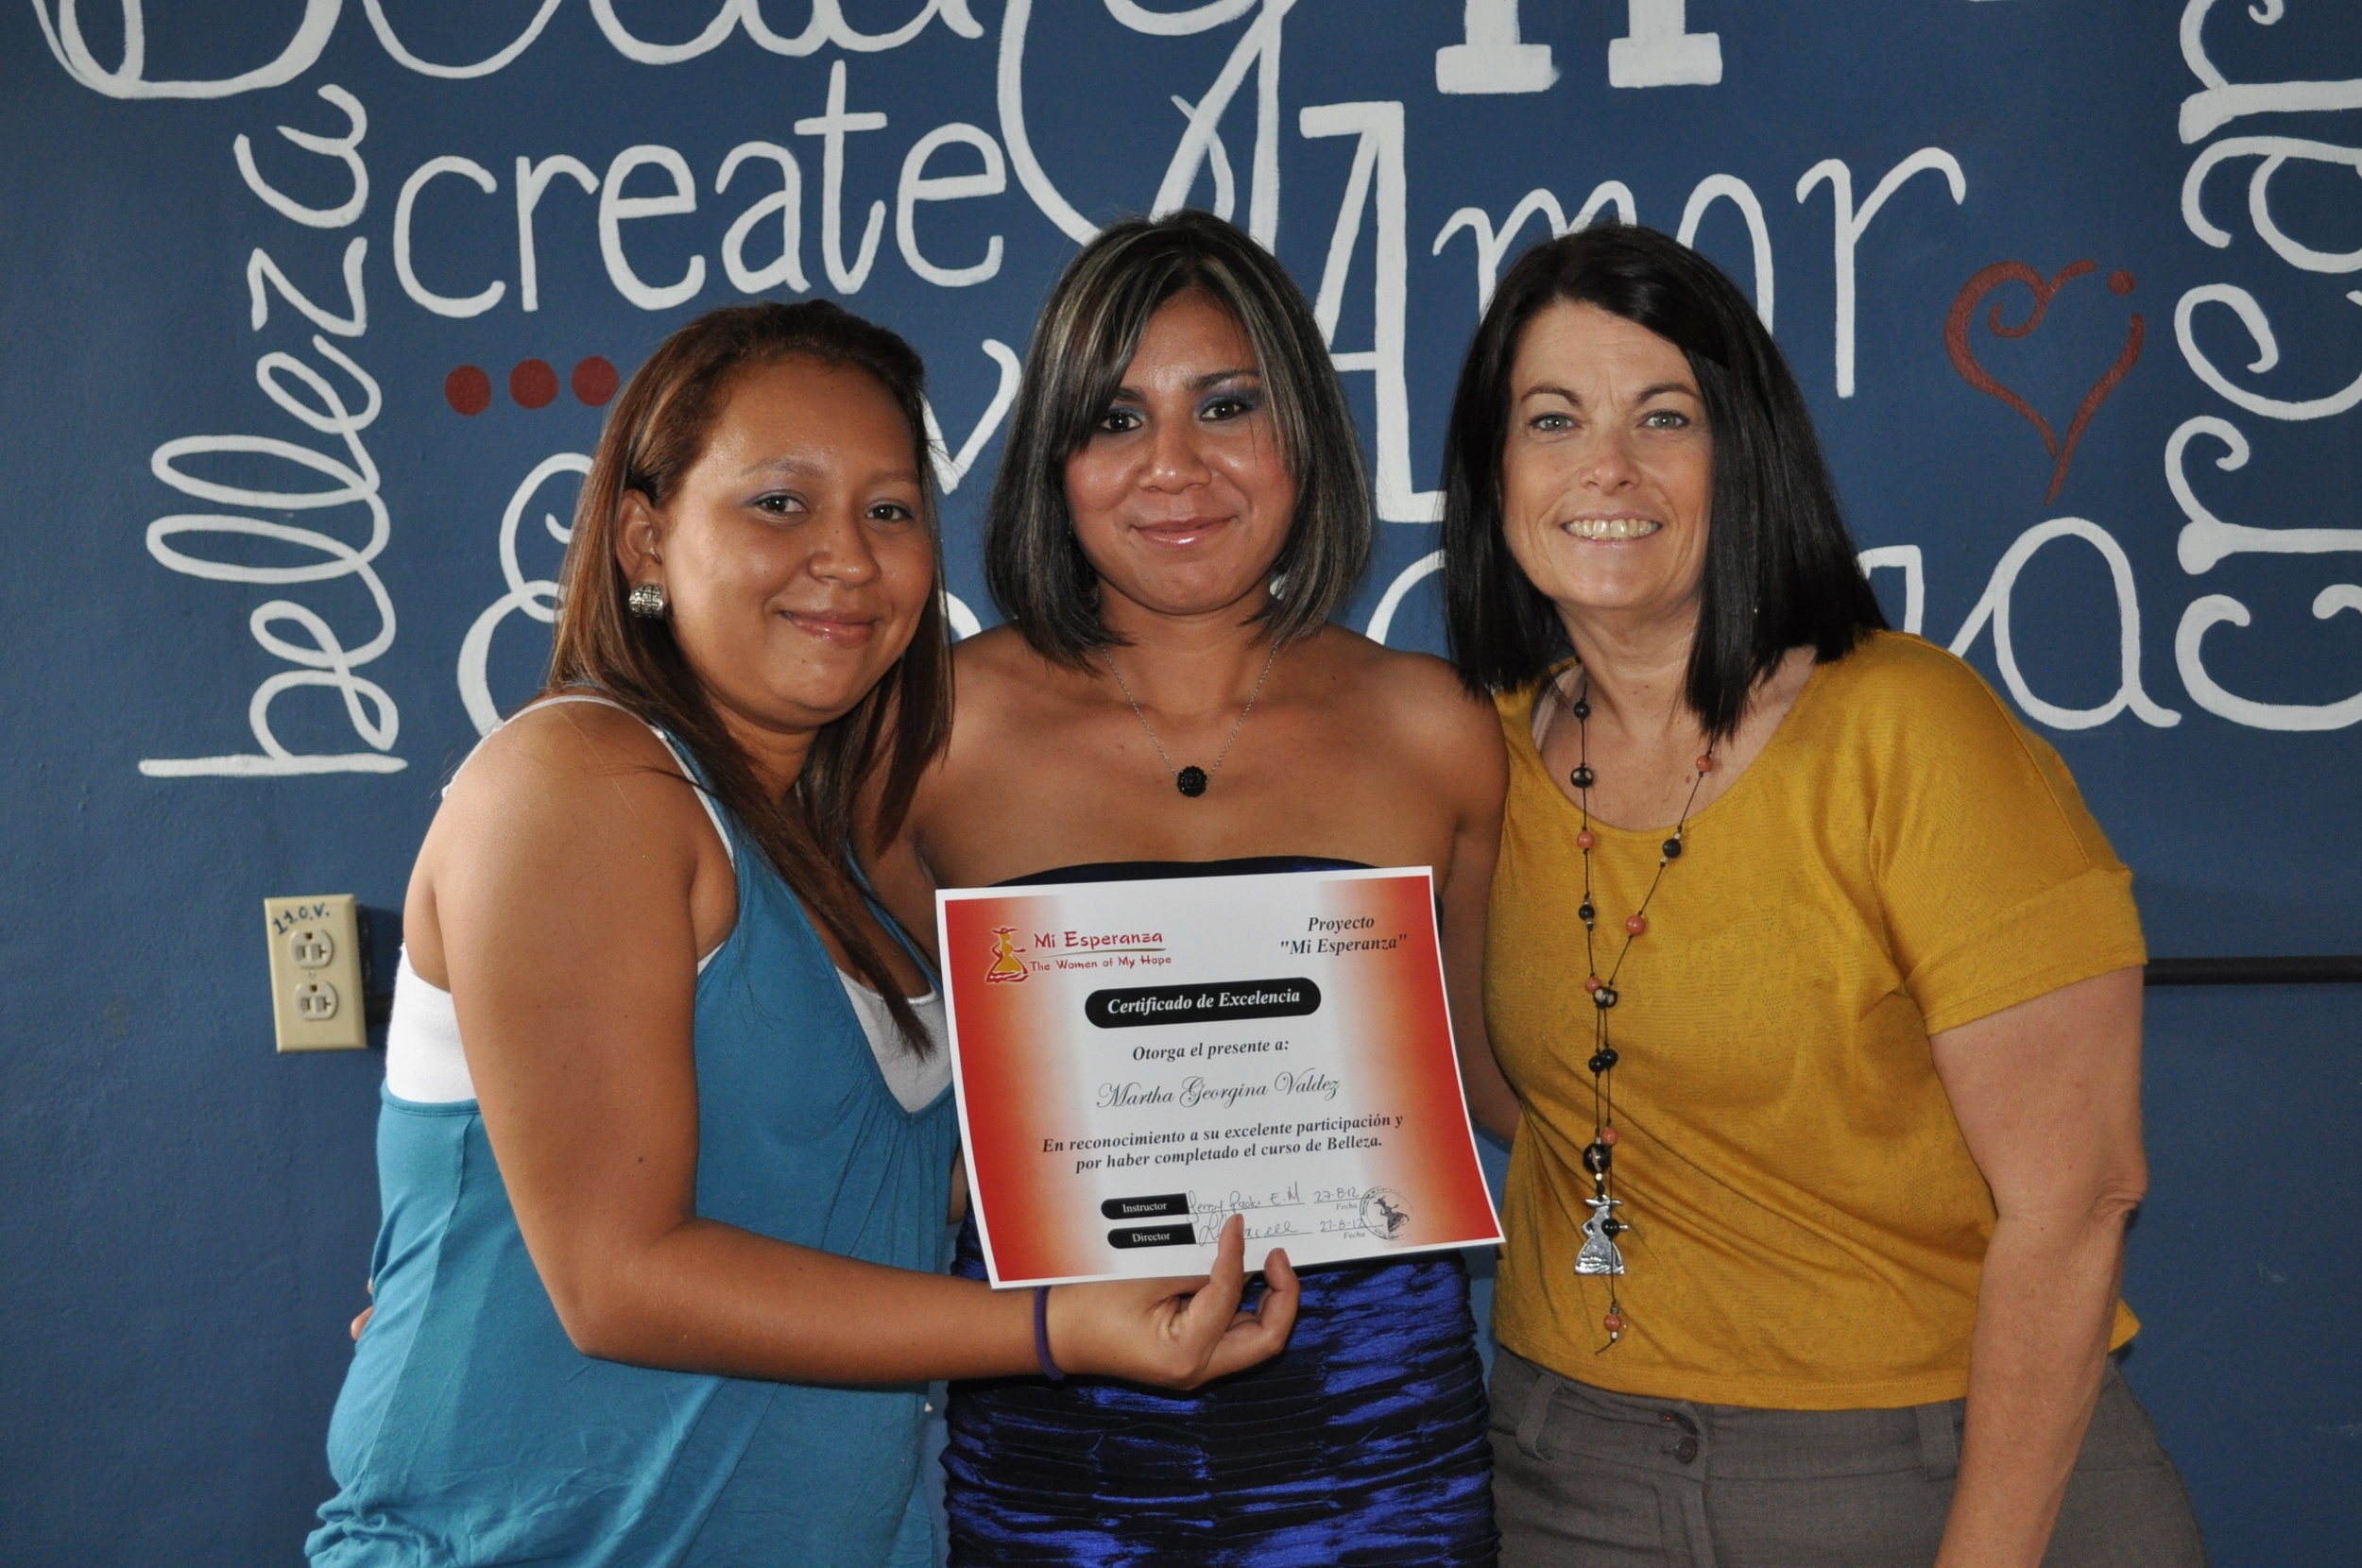  graduation day August 2012 with instructor Paola and co-founder Lori Connell 